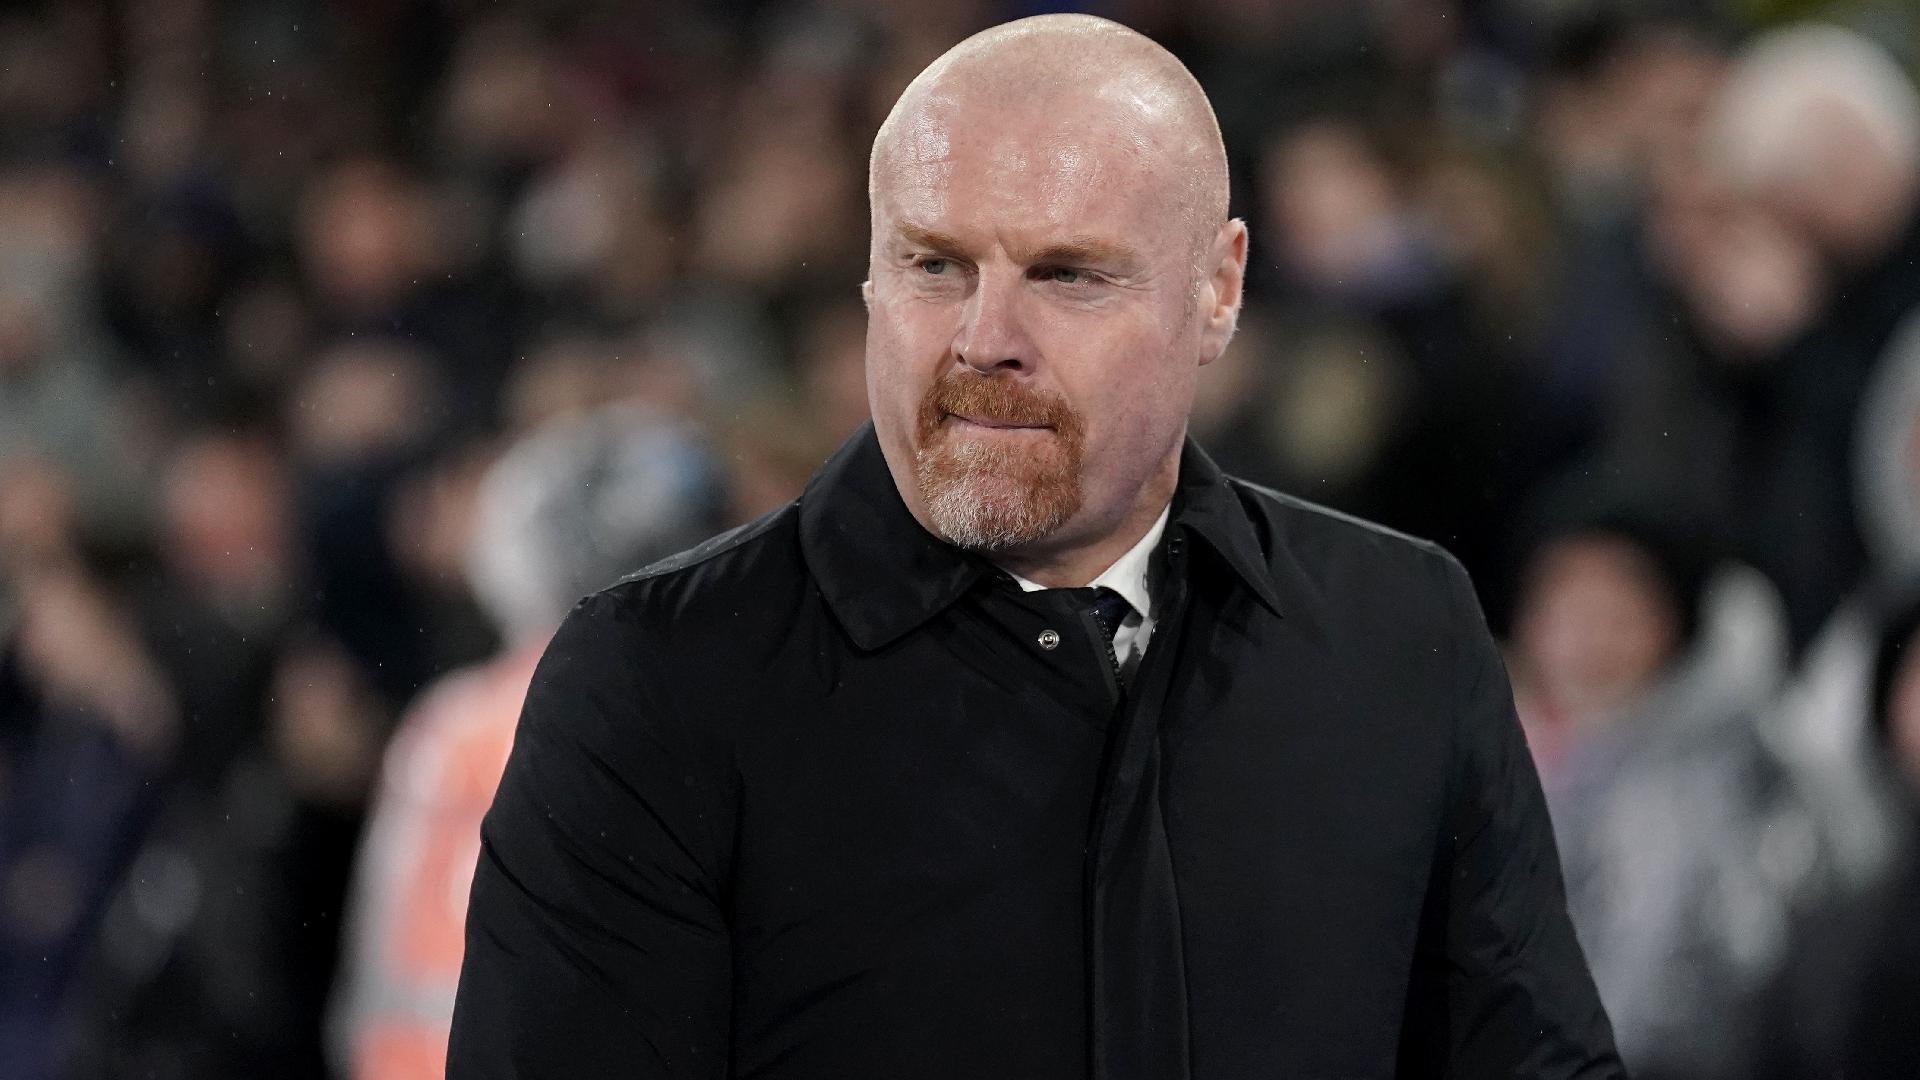 Sean Dyche: Everton focused on appeal amid threat of further sanction